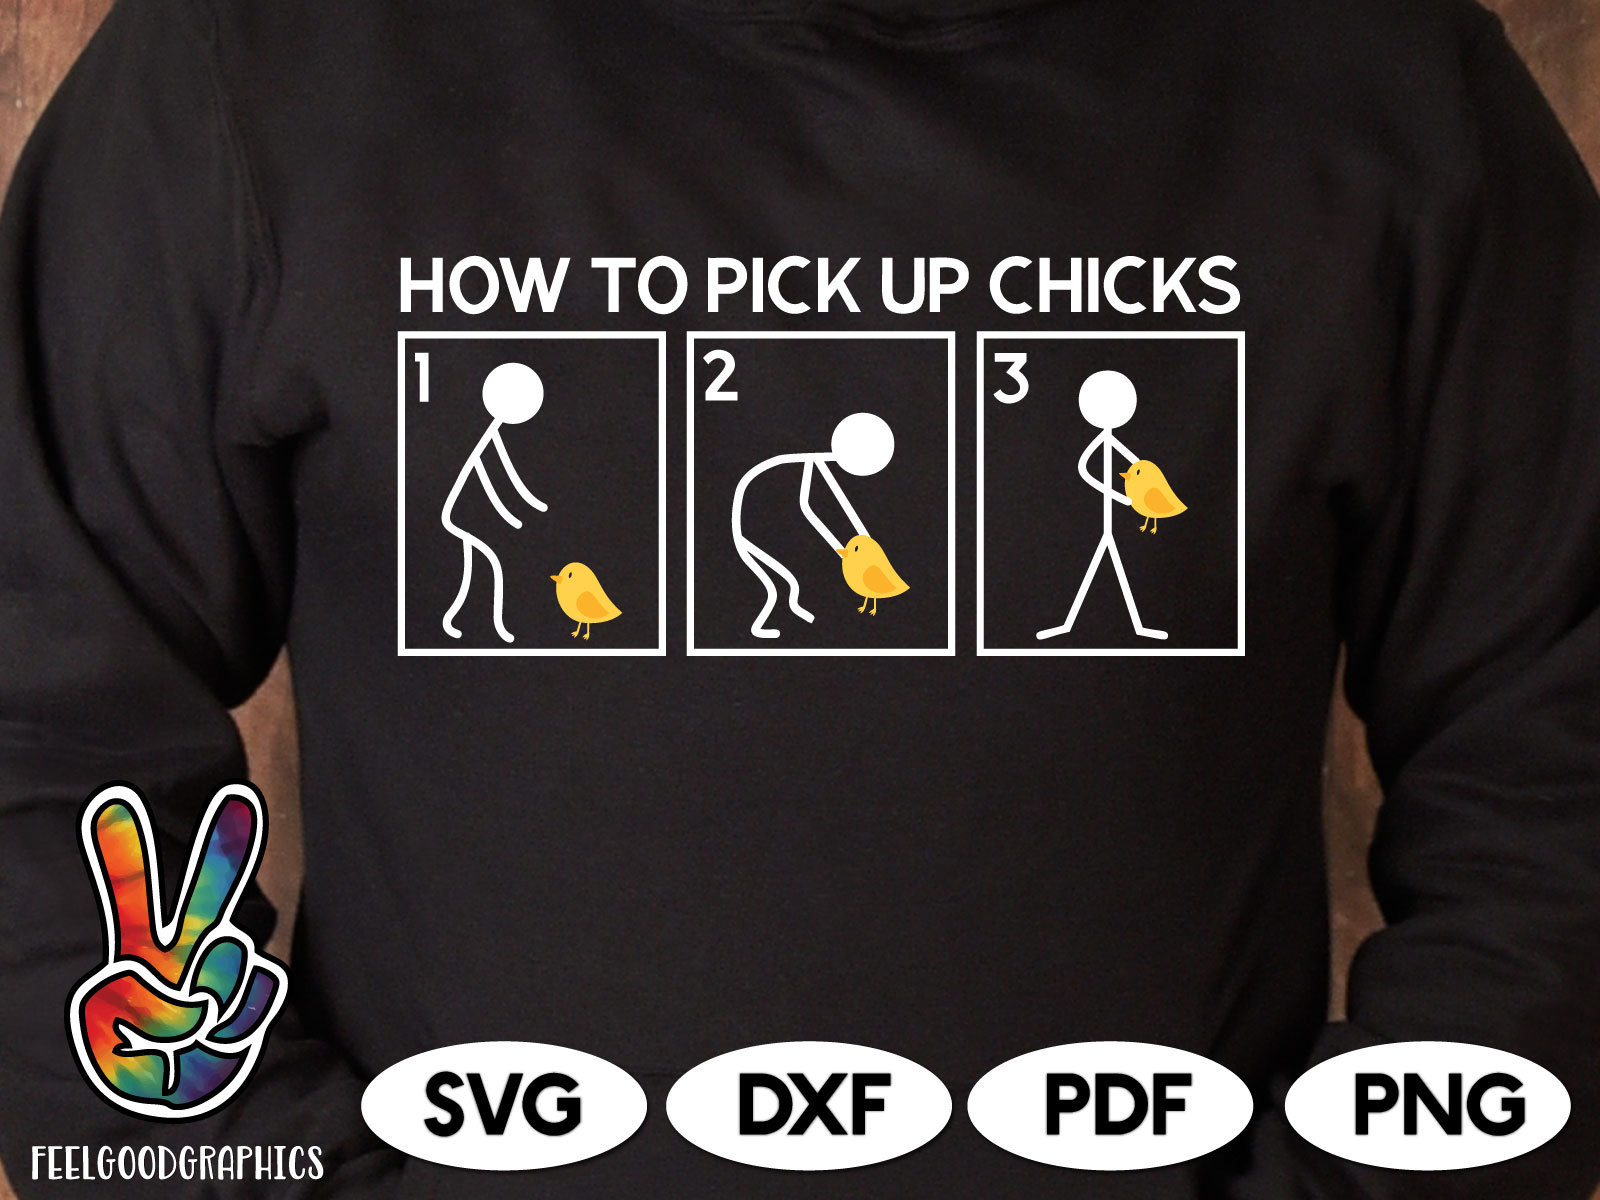 How to pick up. How to pick up chicks футболка. Значением pick to pick напряжения. Pick to pick напряжение.